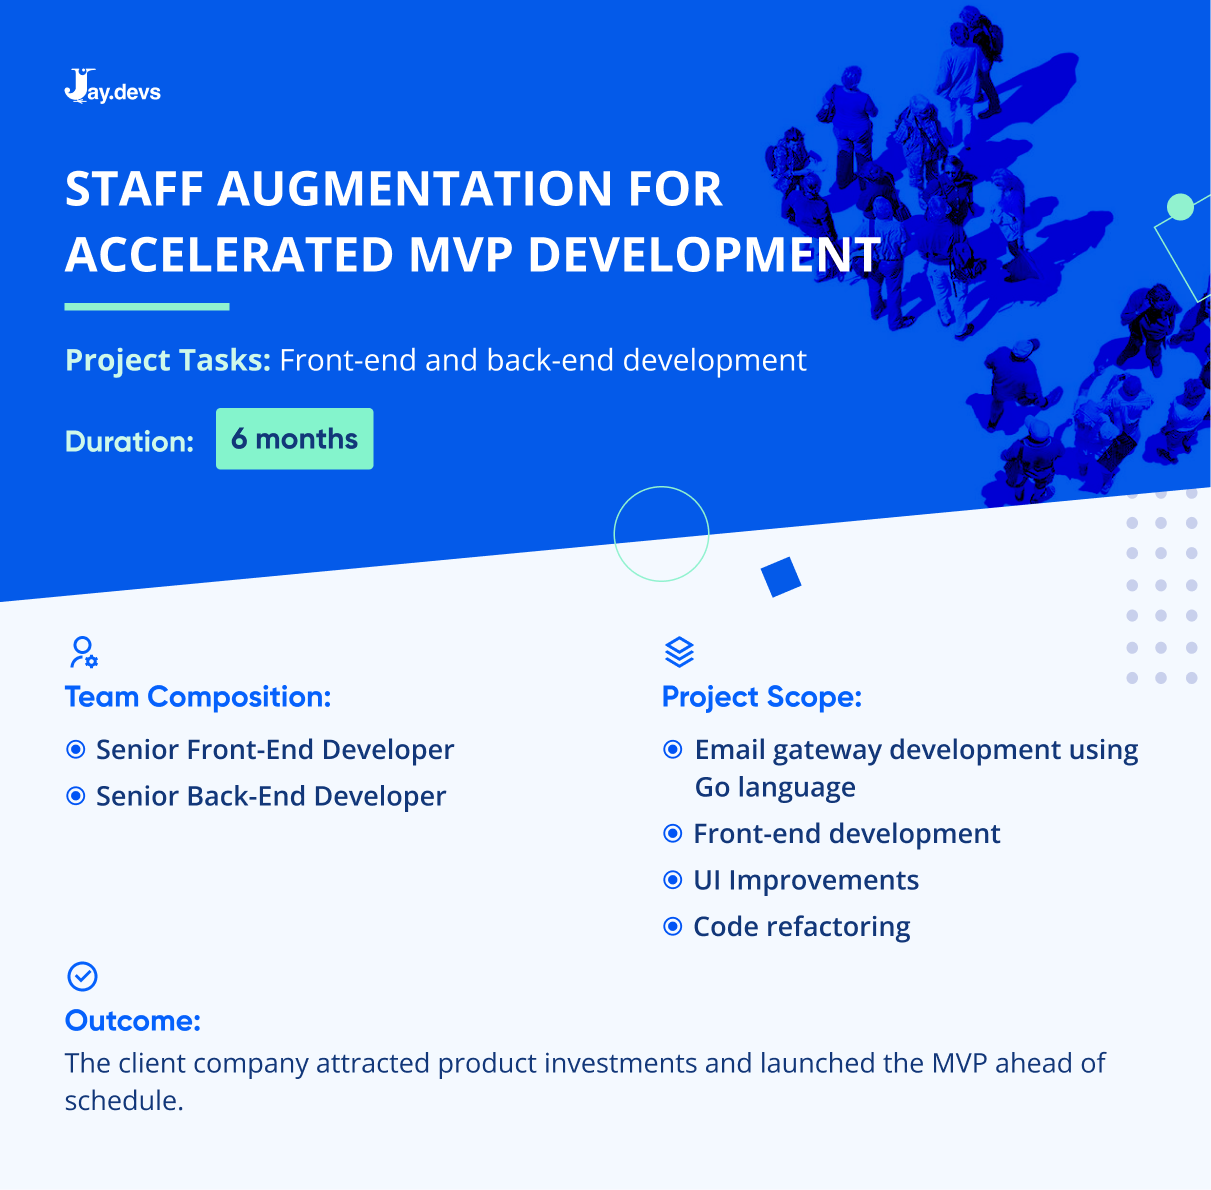 Staff augmentation for accelerated MVP development